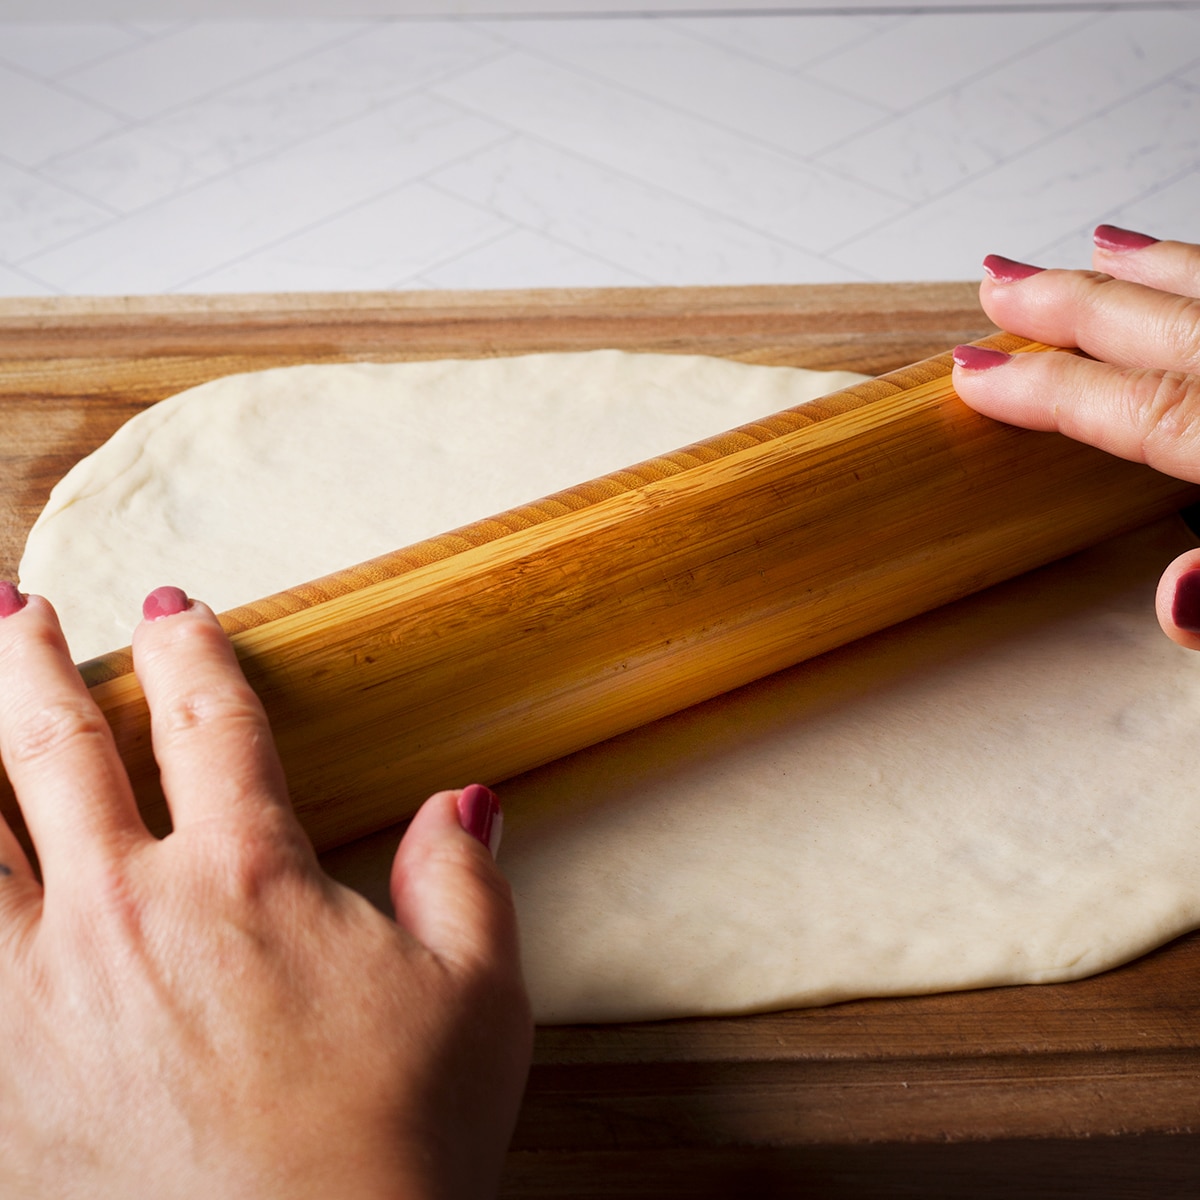 Someone using a wood rolling pin to roll out tortilla dough.